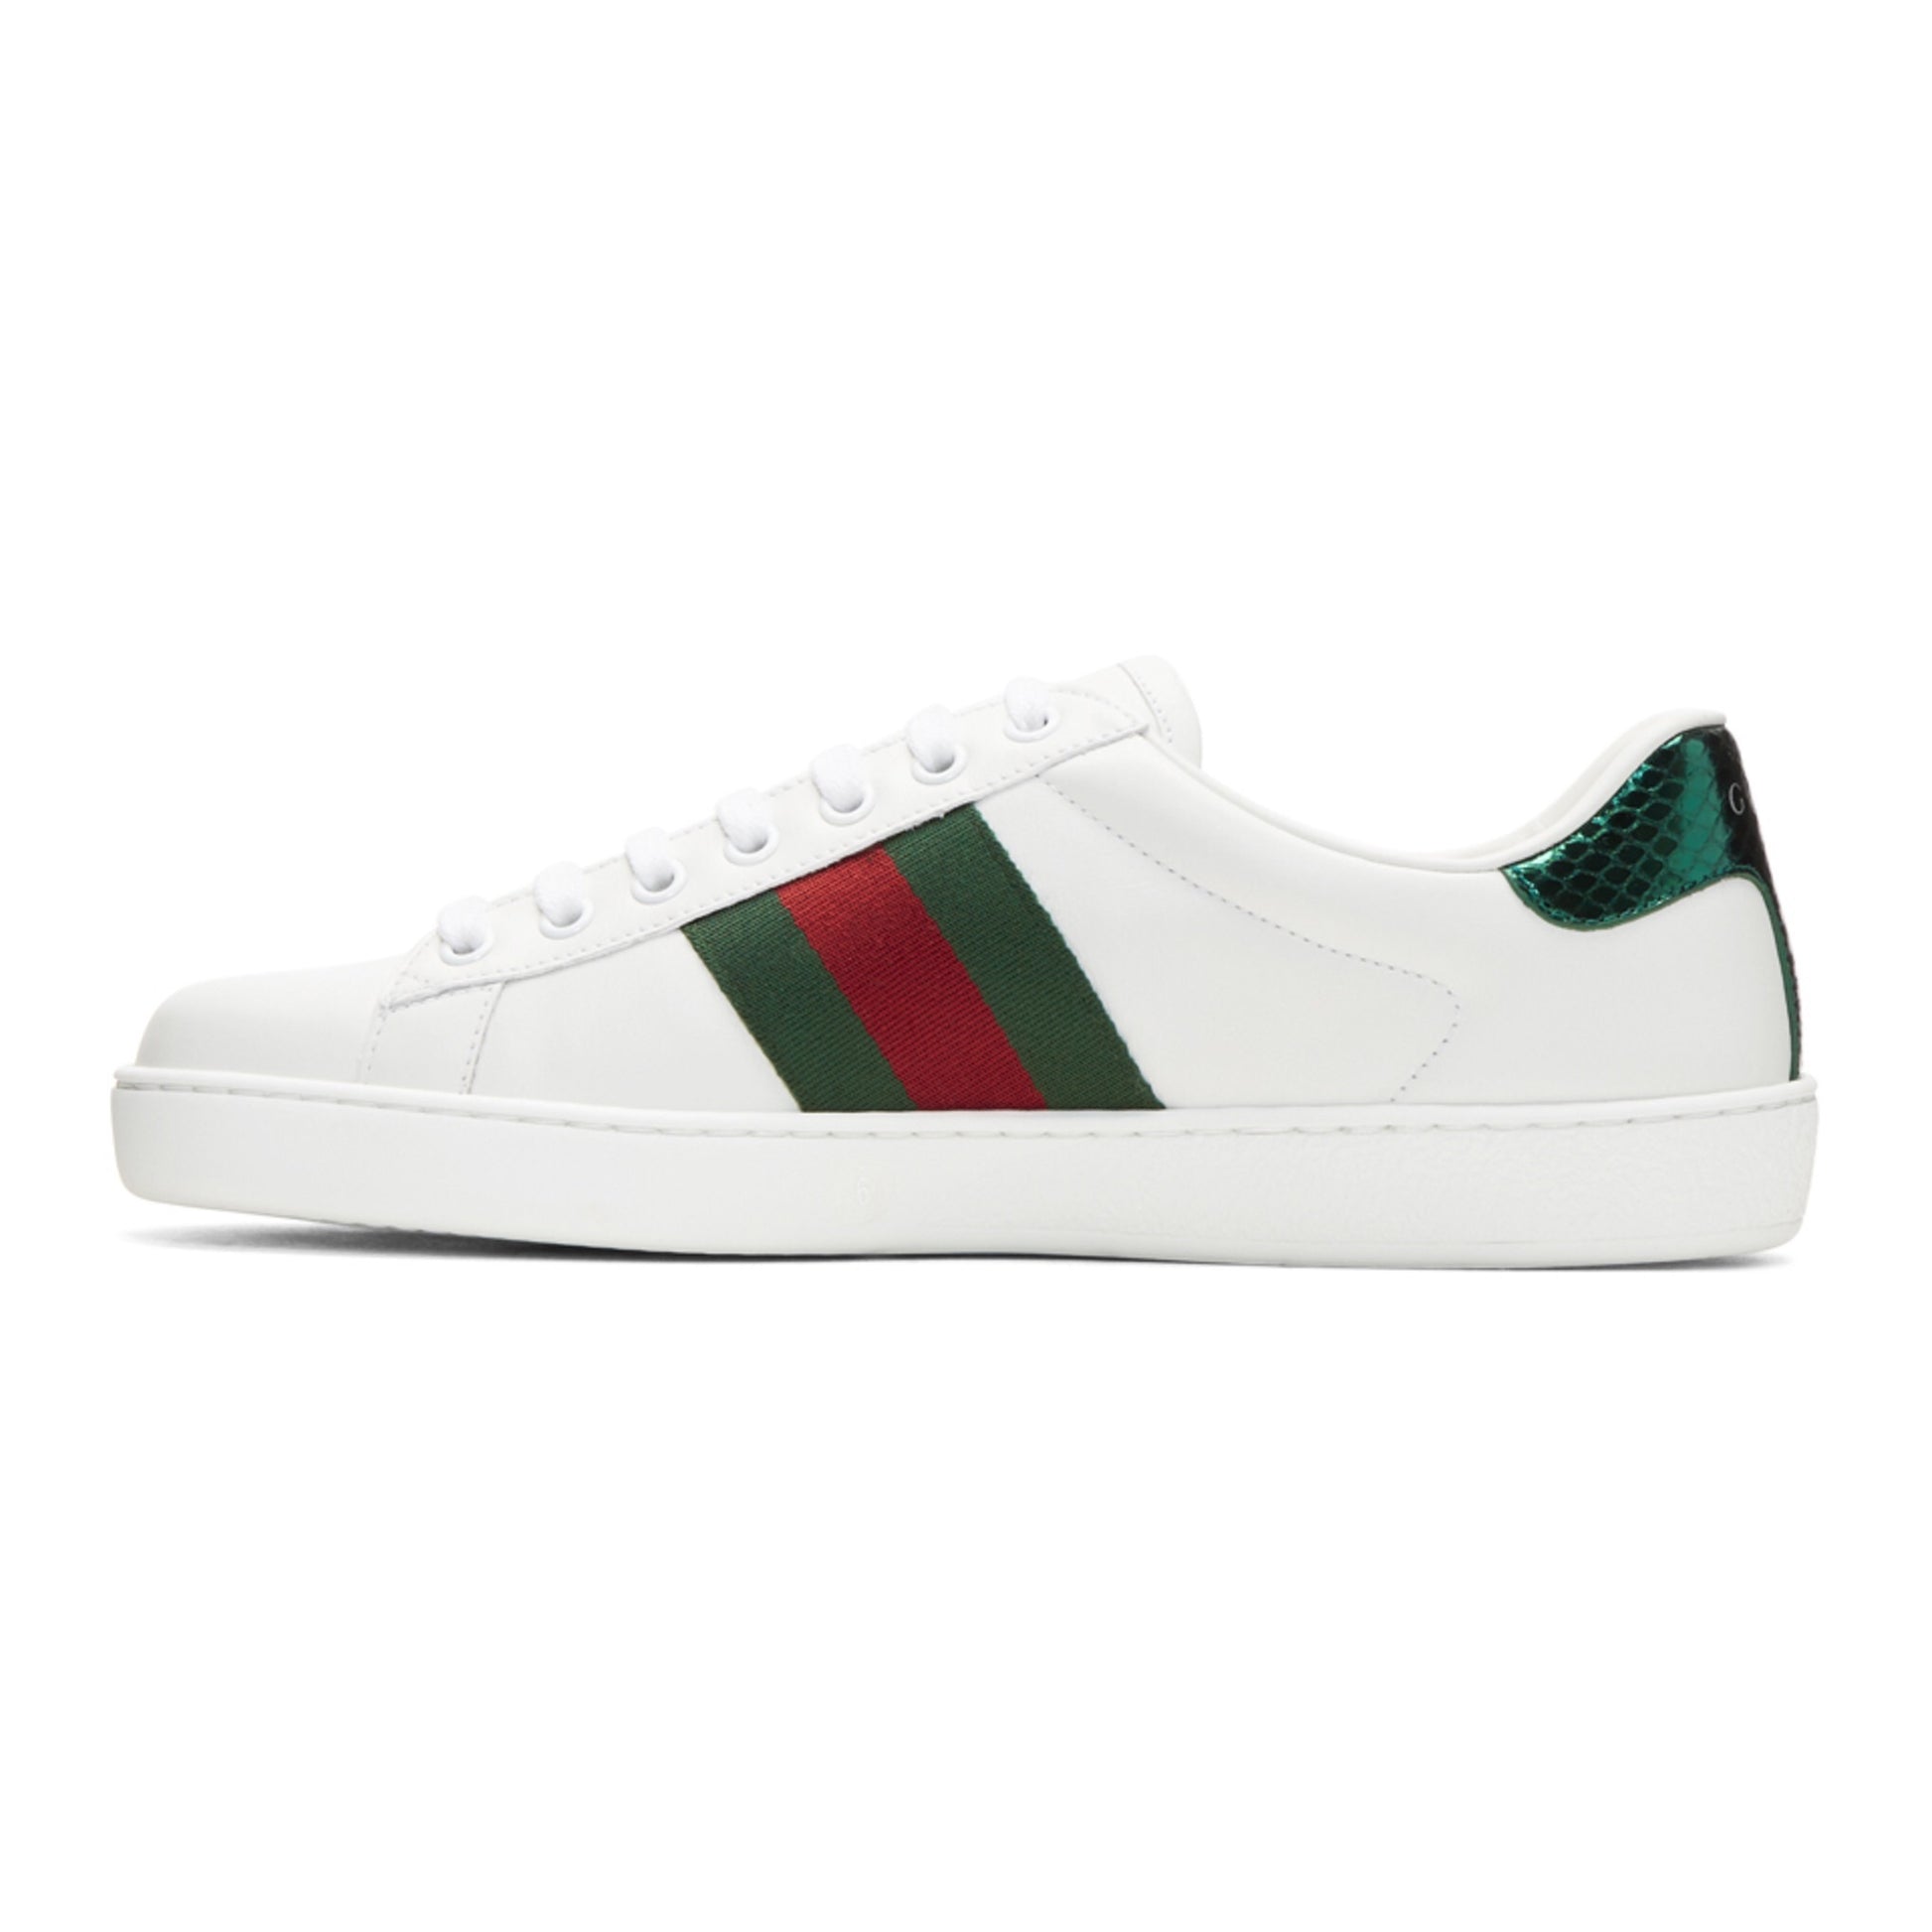 Gucci “Tiger Ace Low Top” - Centrall Online